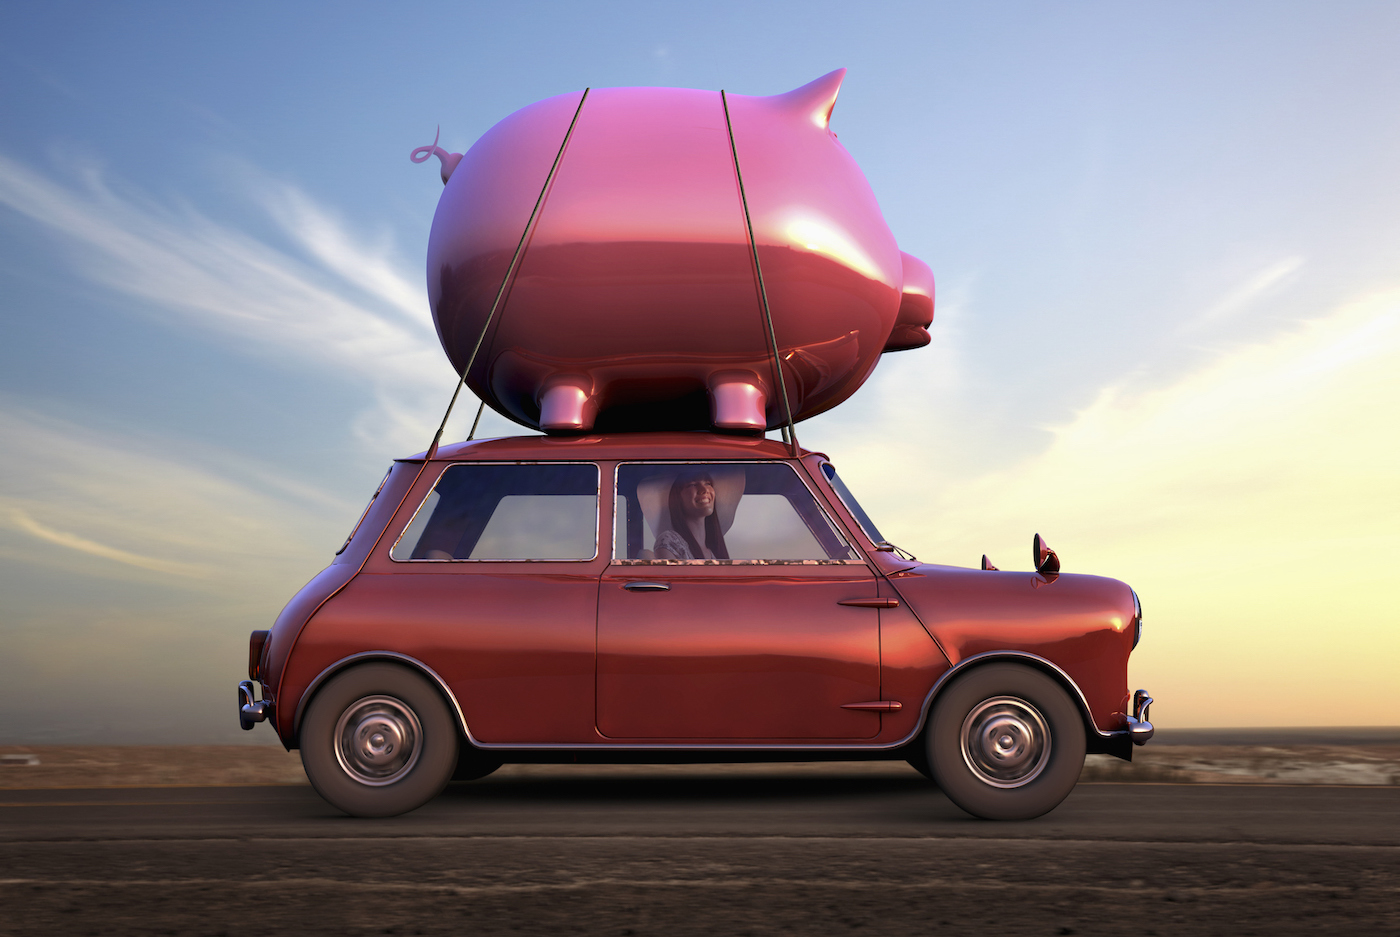 Woman wearing floppy hat driving car with a giant piggy bank on top